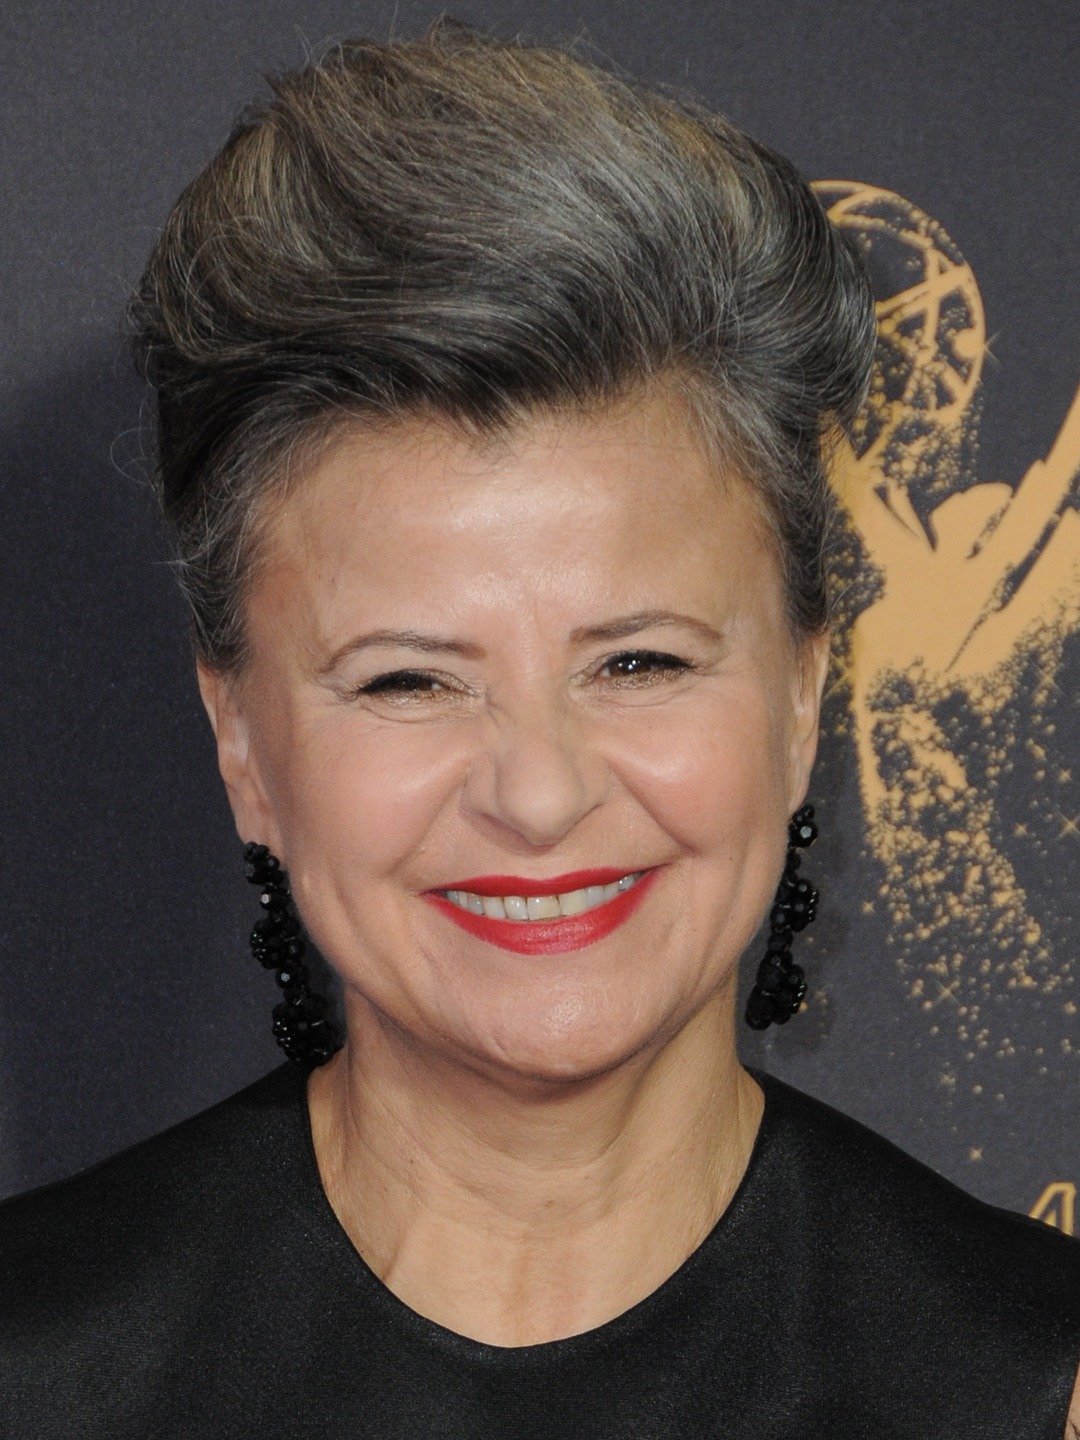 How tall is Tracey Ullman?